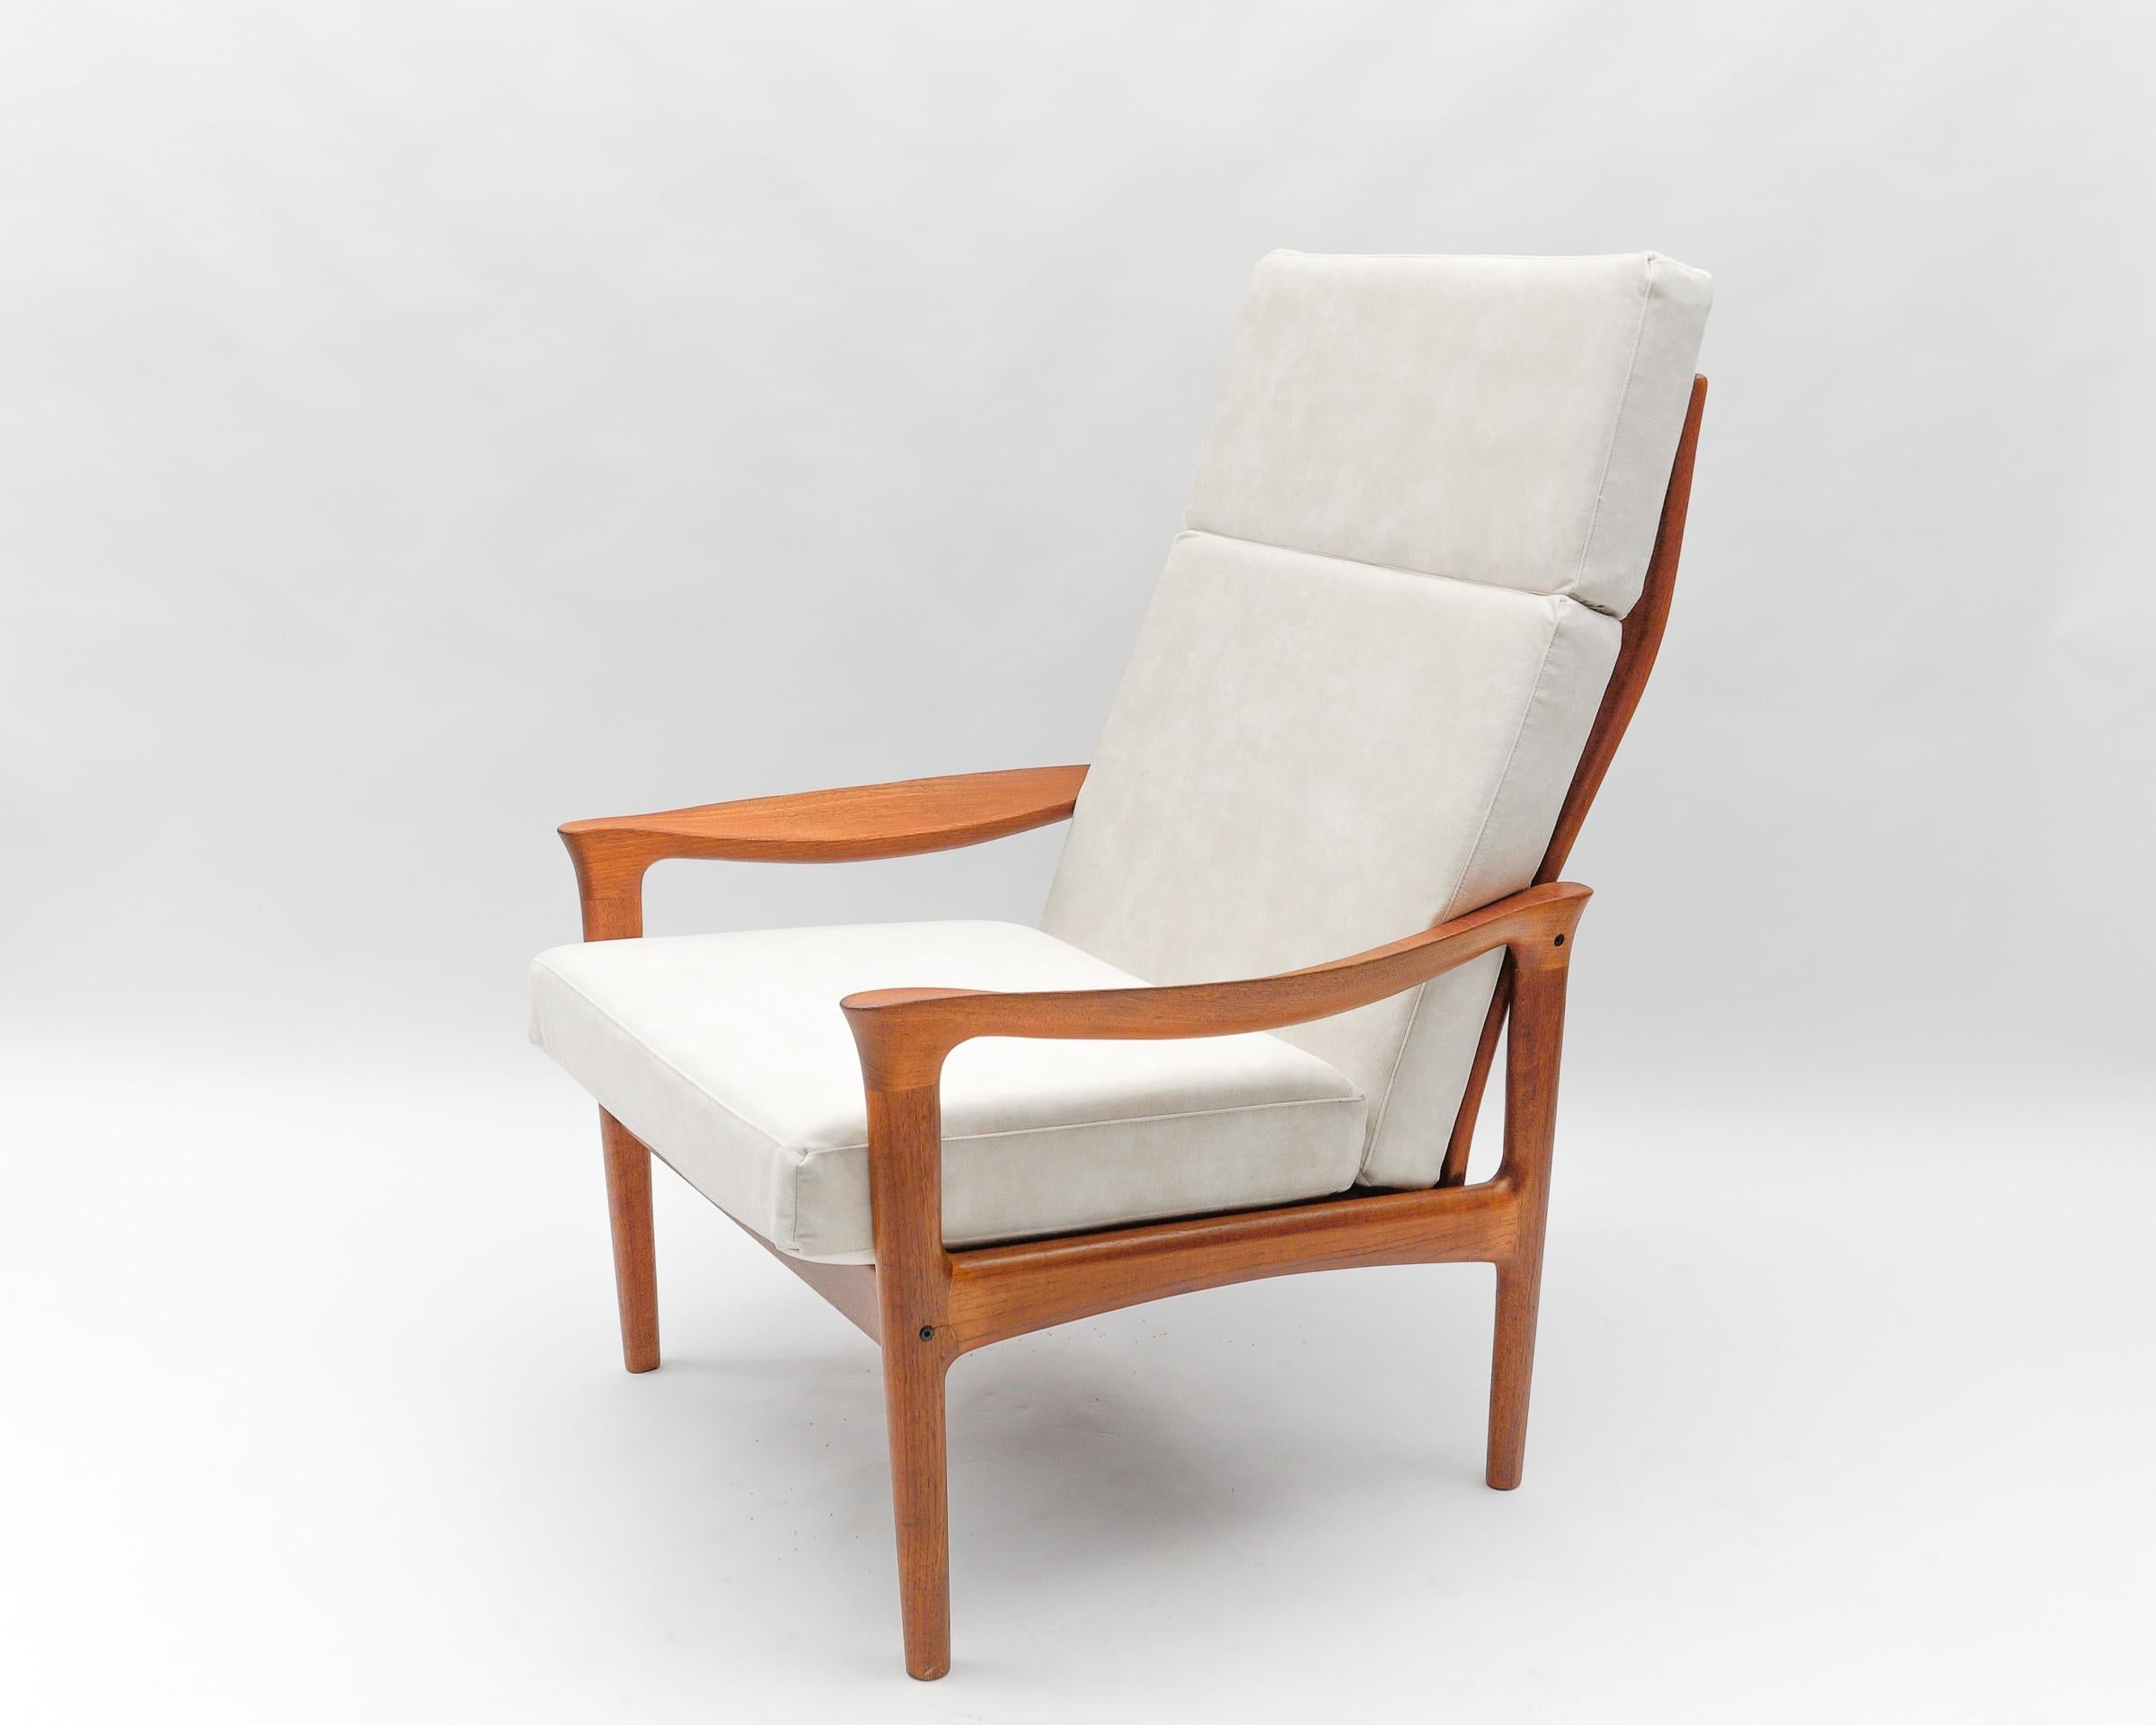 Newly upholstered teak high-back armchair, 1960s Denmark

We have a total of four identical armchairs, all listed here on the platform.

Probably made by Illum Wikkelsoe.

Year: 1960s 

Origin: Denmark 

Material: Upholstery fabric, teak wood.